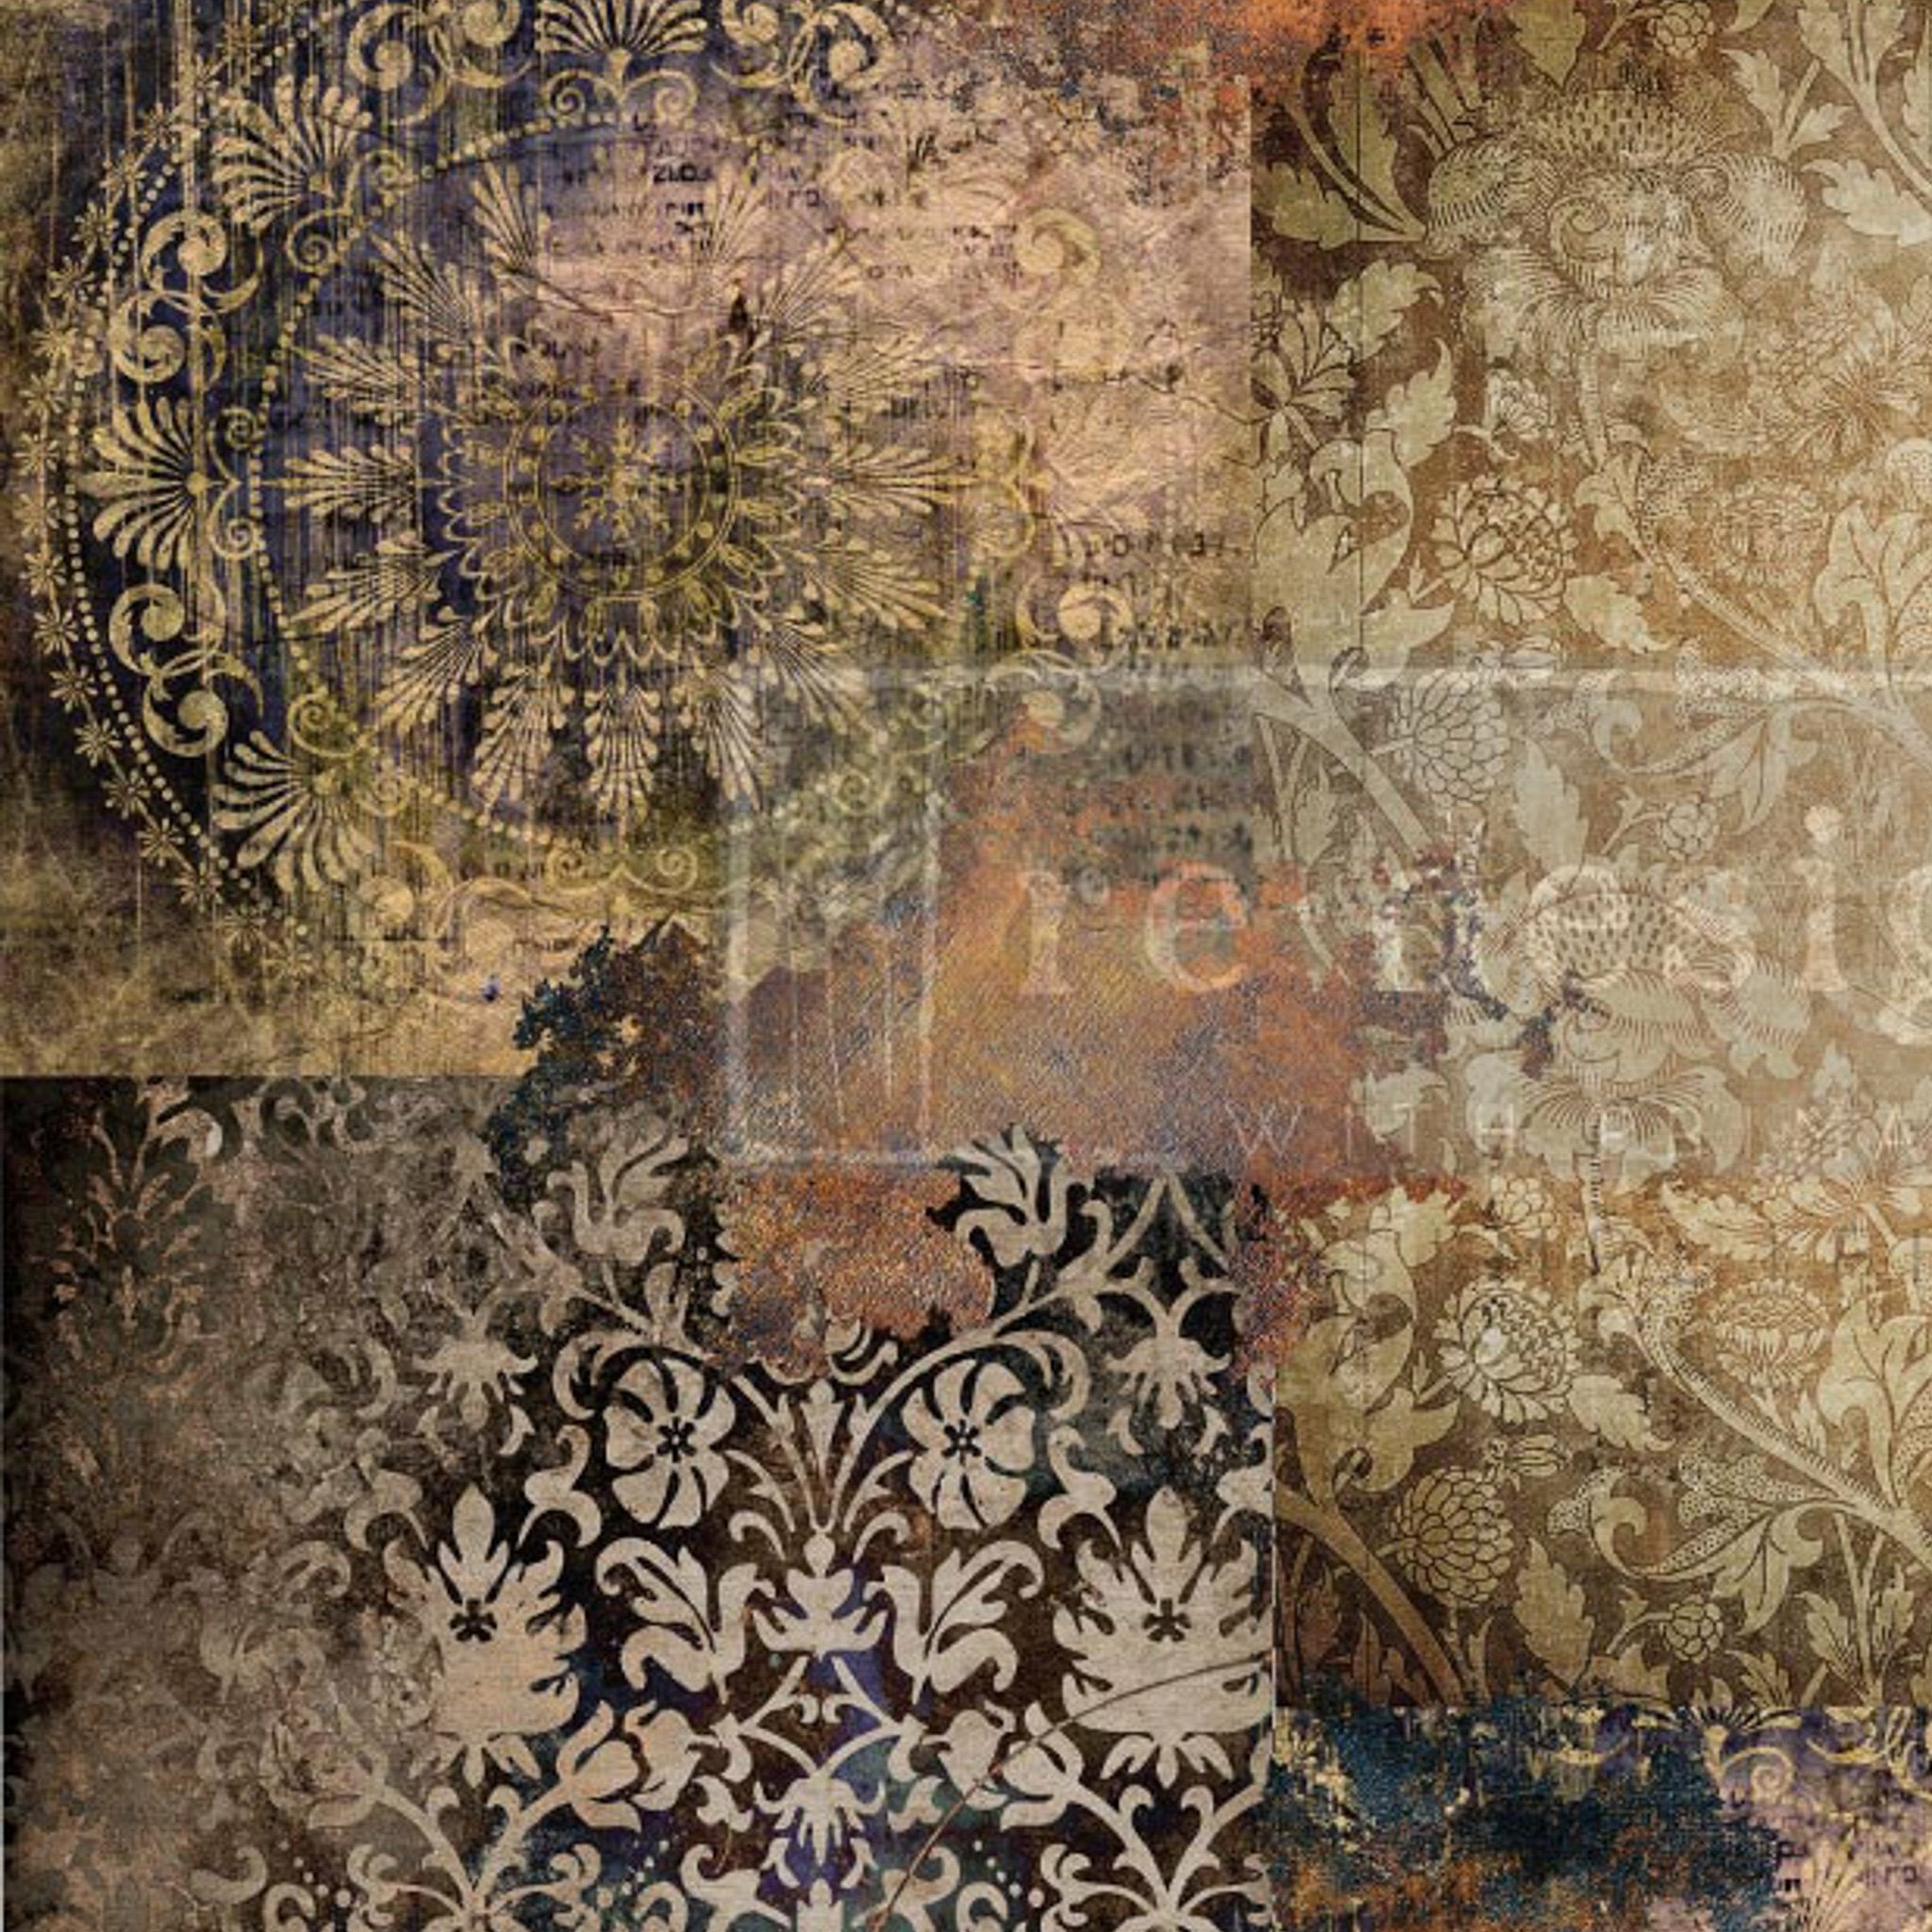 A close-up of a tissue paper design that features a collage of weathered vintage damask patterns.